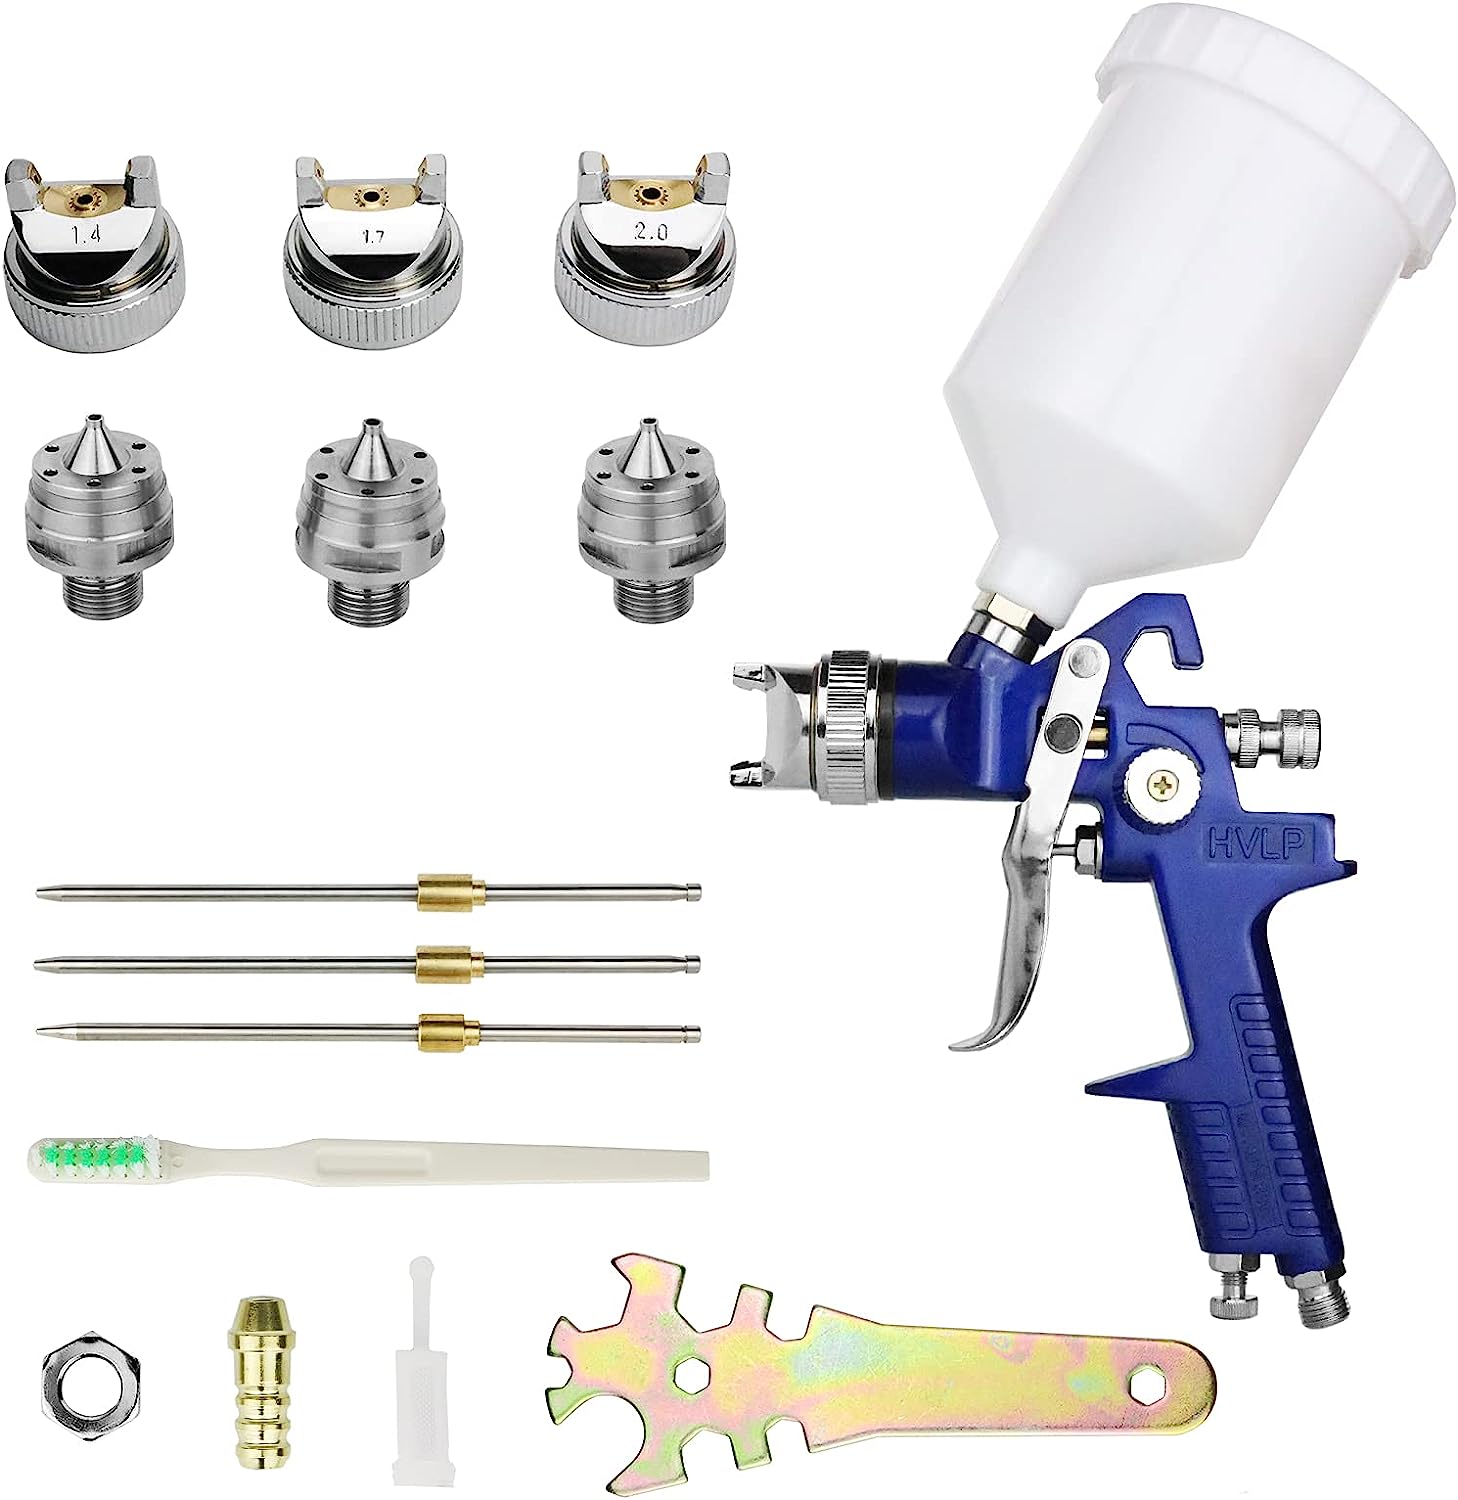 HVLP Spray Gun with Replaceable 1.4mm 1.7mm 2.0mm [...]